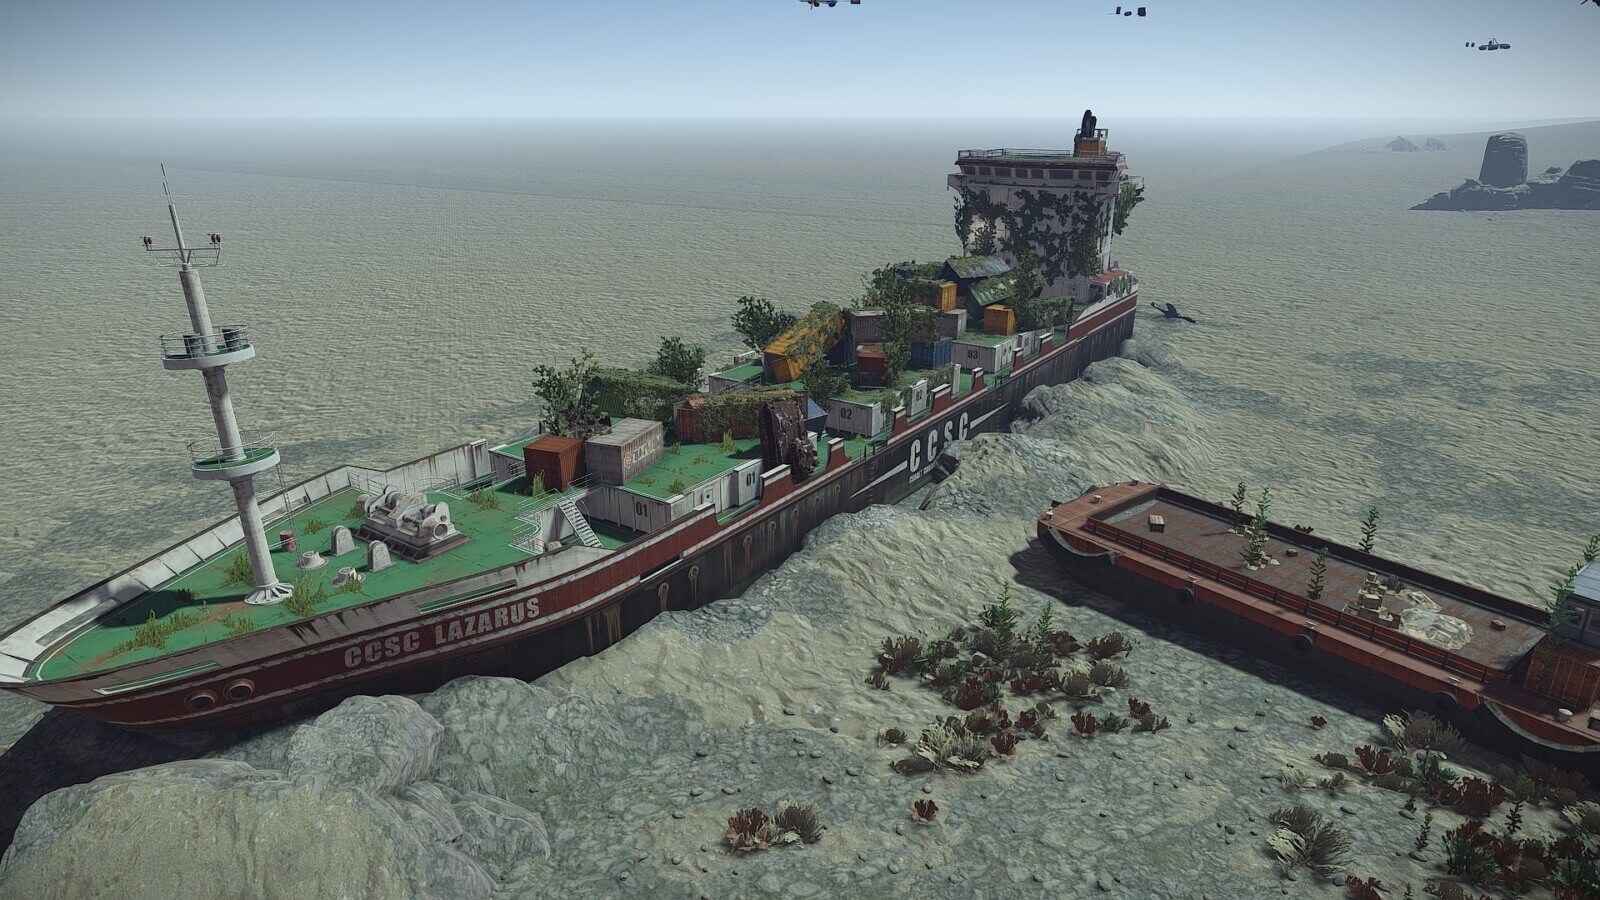 Sunken cargo ship is a rather tricky monument to visit due to being under water on observer island